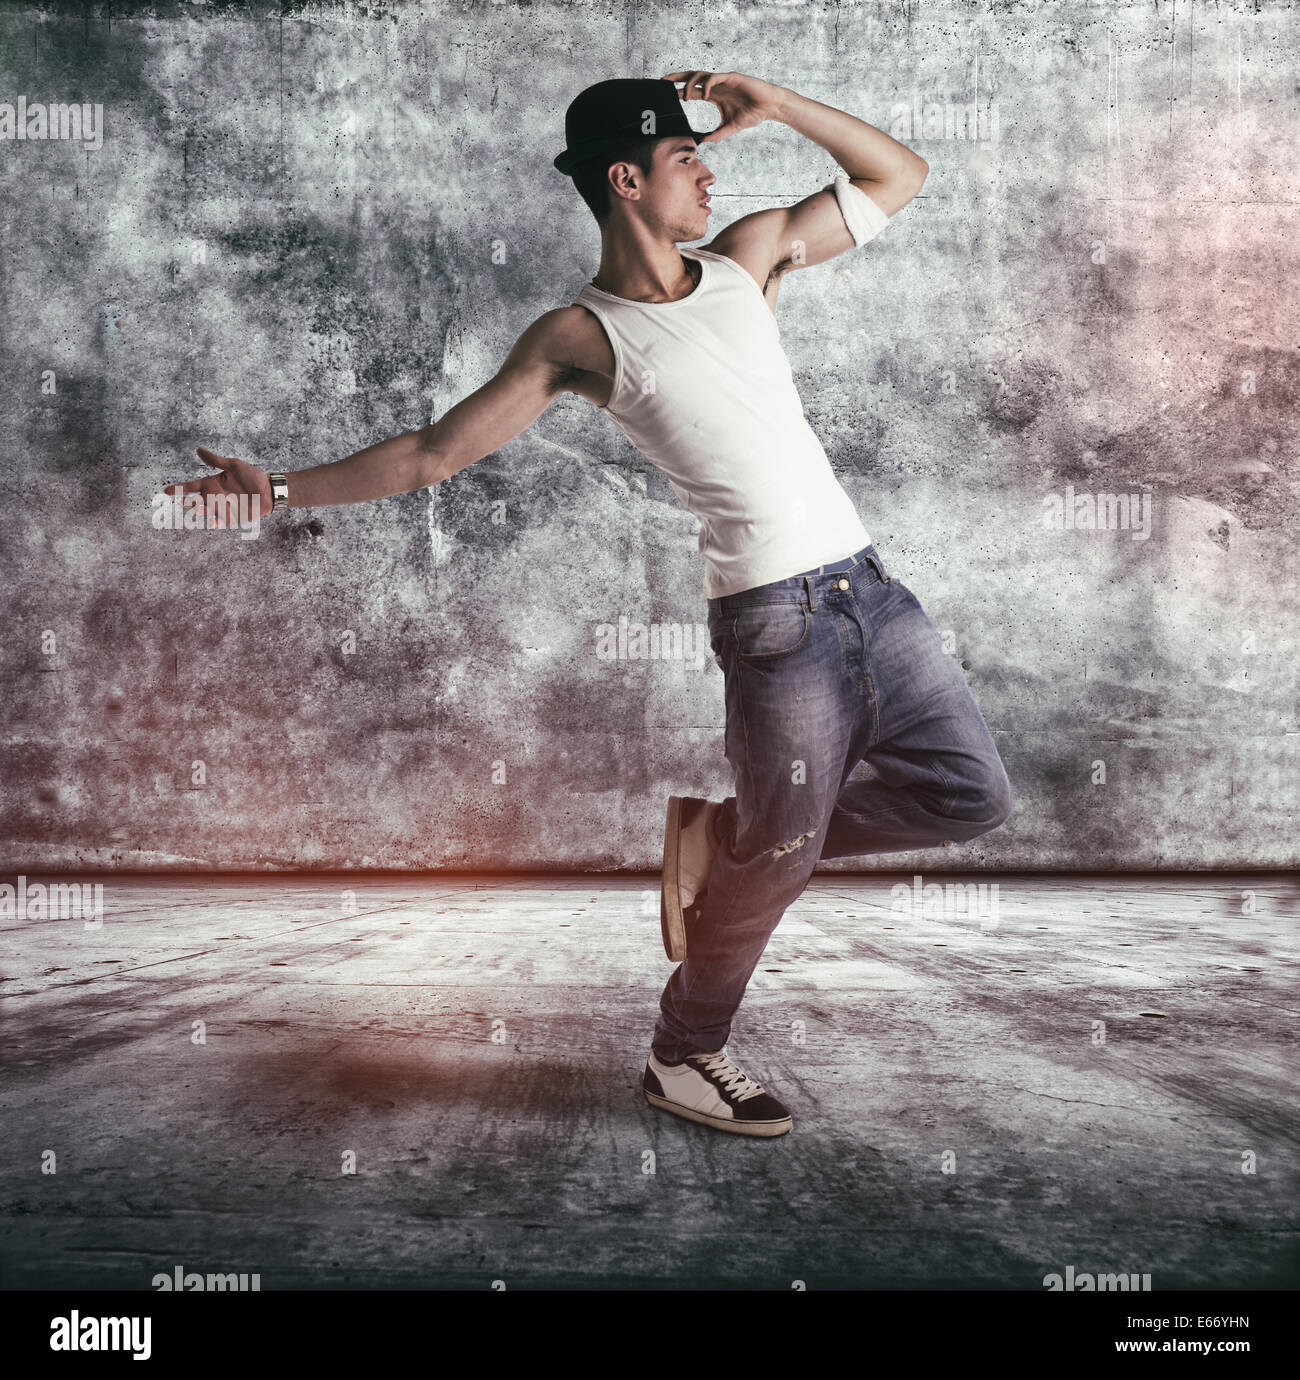 Hip young man in a tank top and hat doing a dance routine posing on one leg in a grunge concrete room or stage, profile full Stock Photo